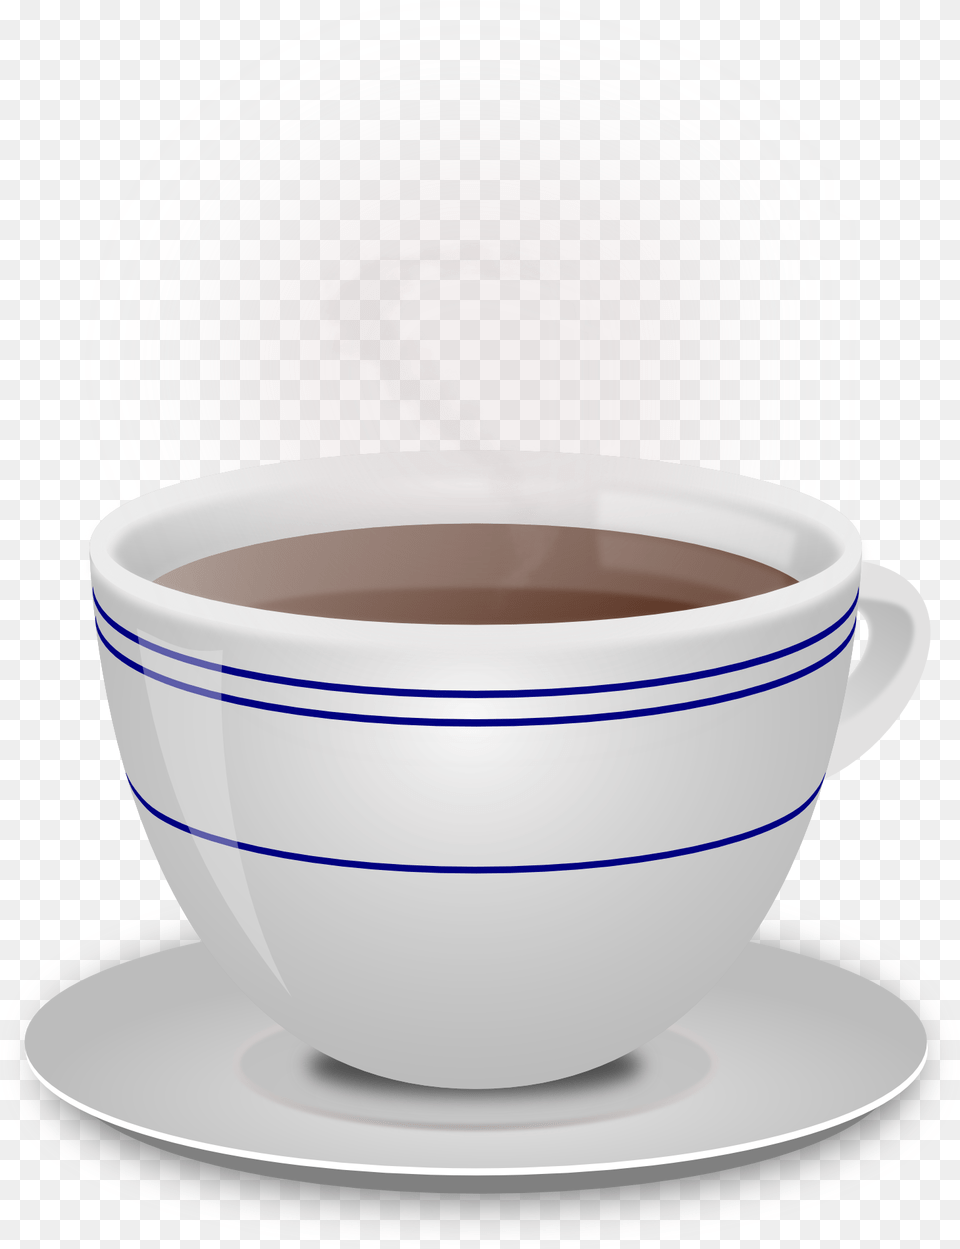 Cup Coffee Beverage Ceramic Hot Mug Saucer Steam Tea Cup Plate, Coffee Cup Free Png